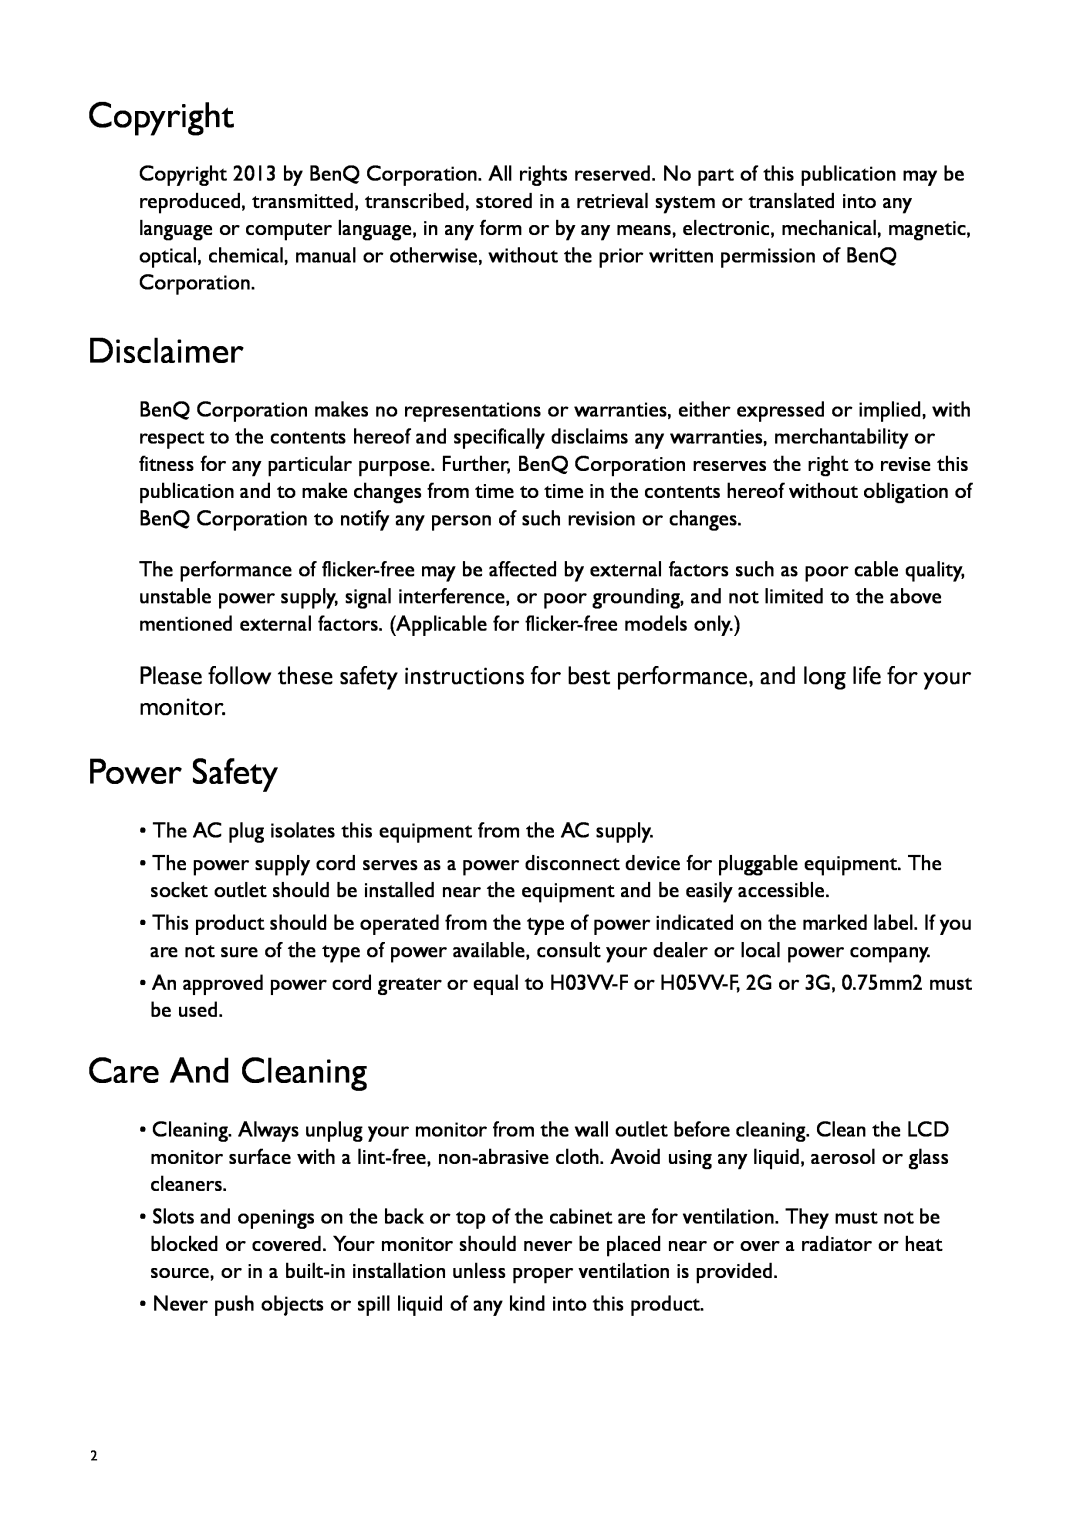 BenQ G50, GL50 user manual Copyright, Disclaimer, Power Safety, Care And Cleaning 